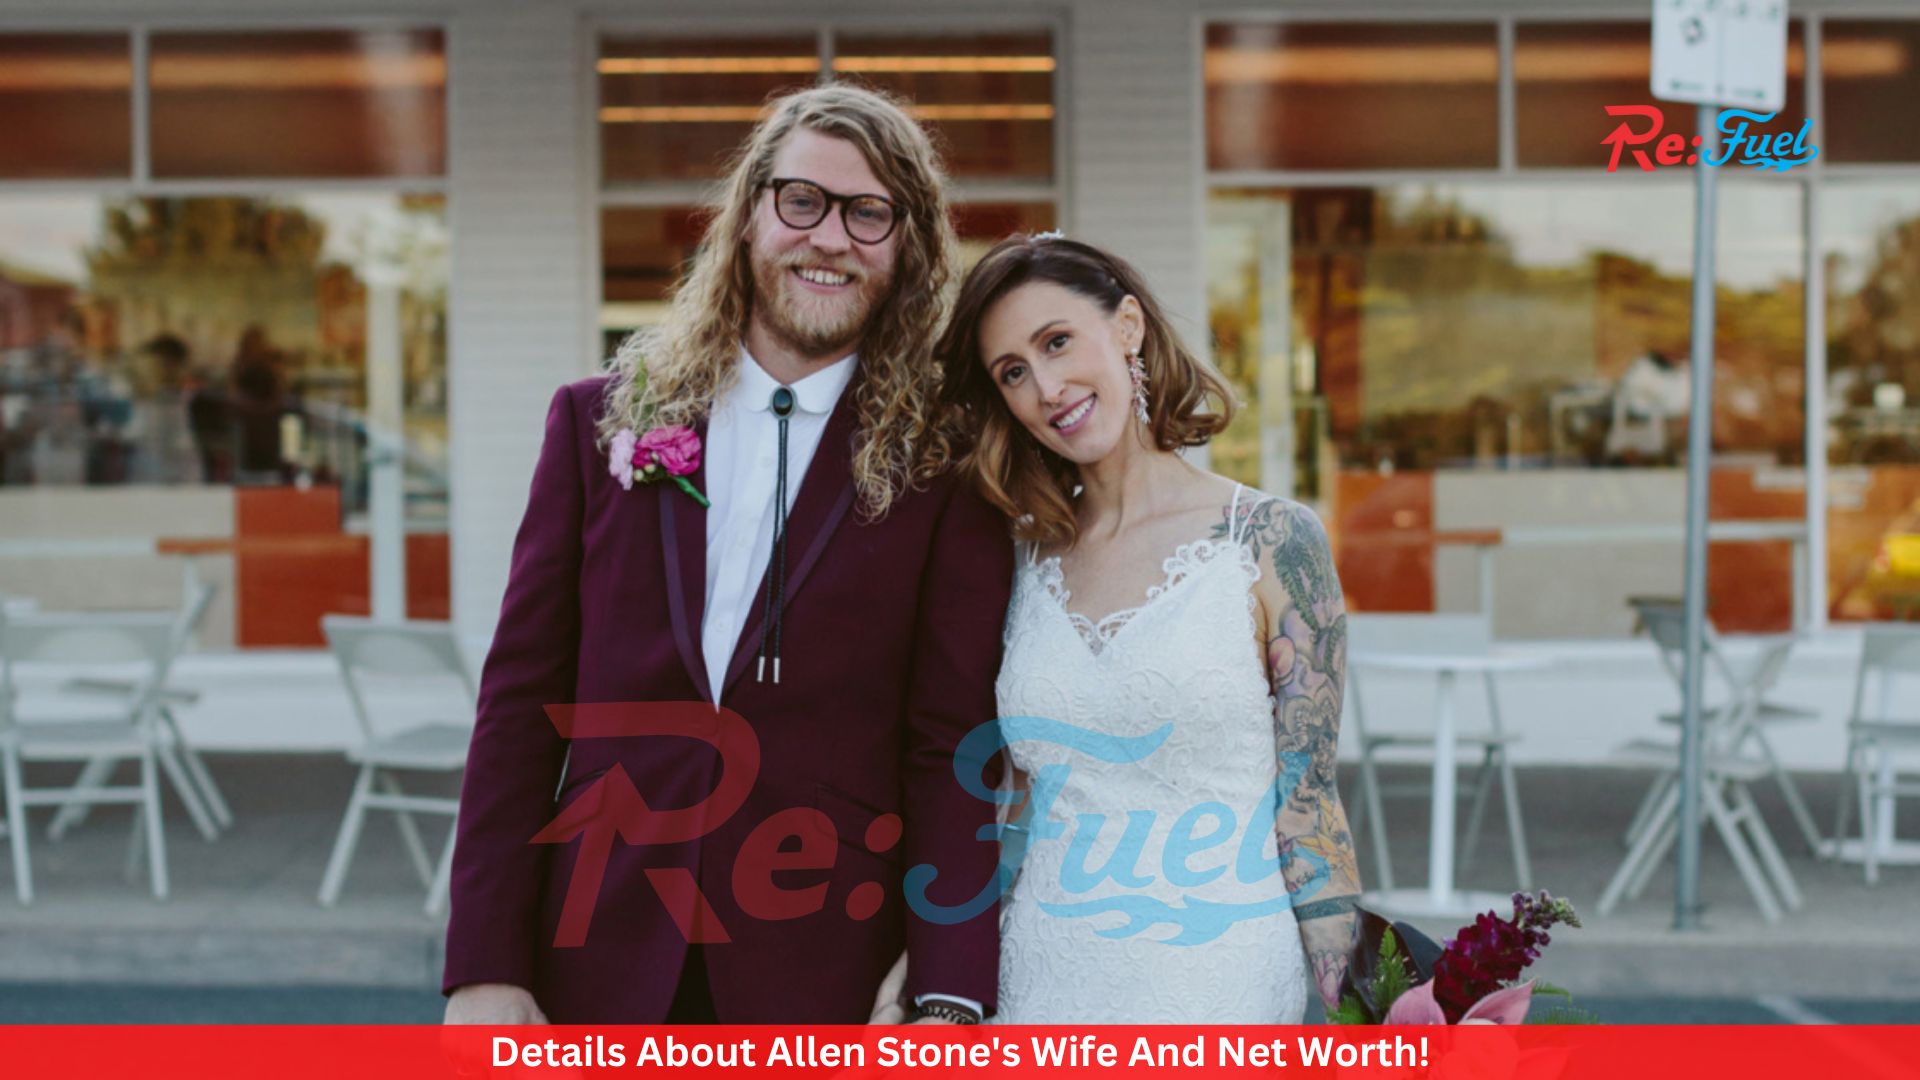 Details About Allen Stone's Wife And Net Worth!